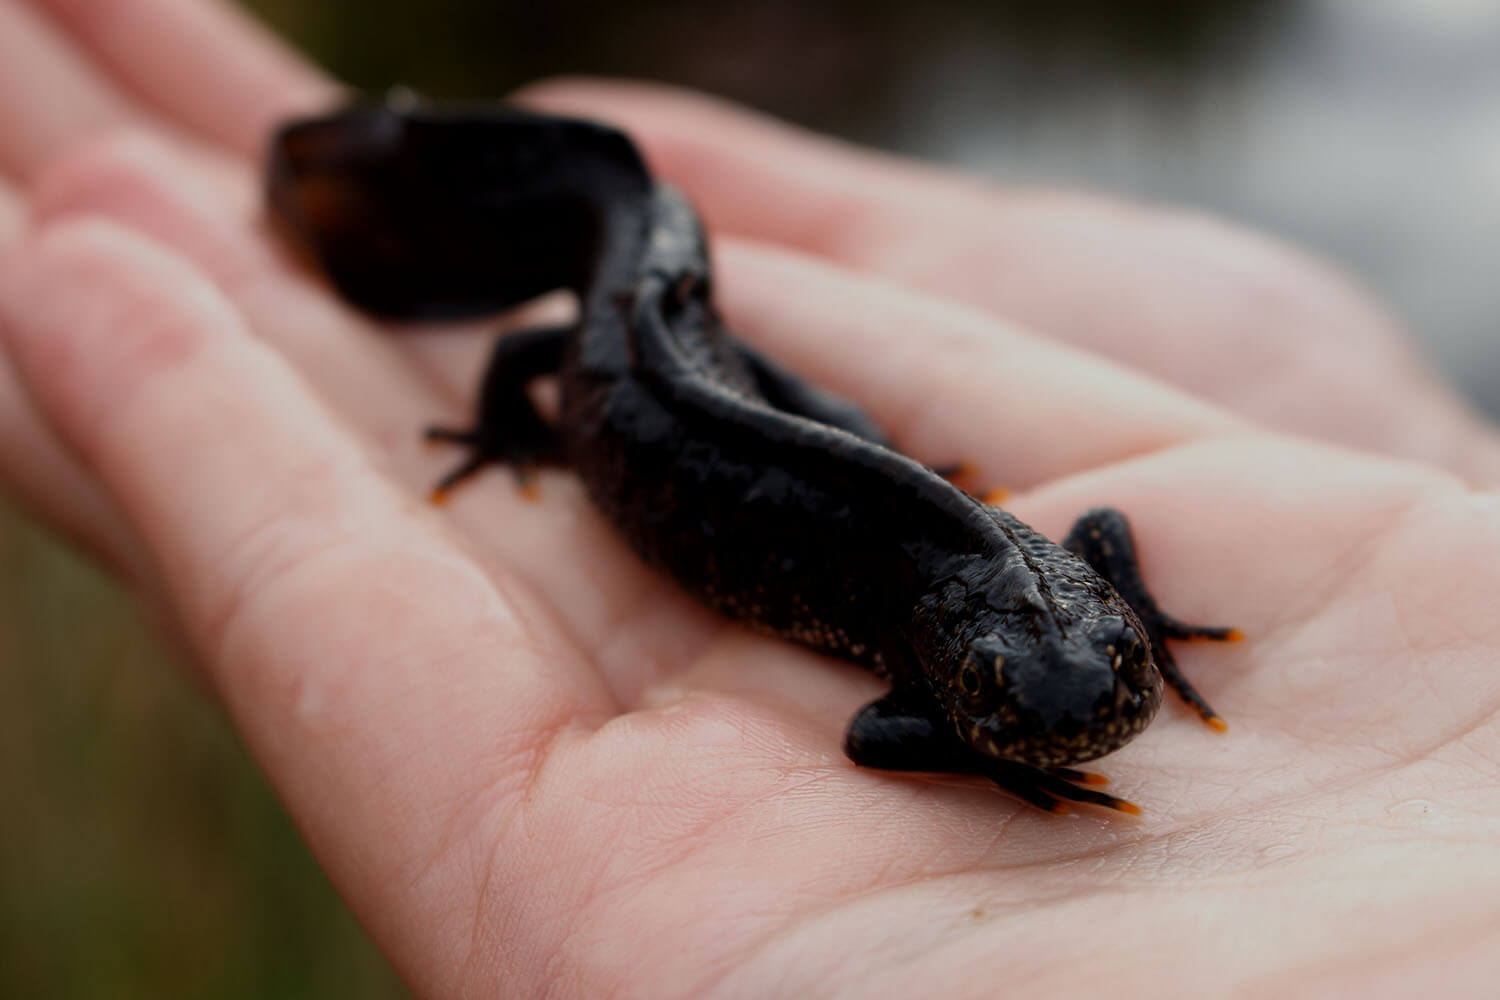 A brown newt being held in the palm of a human hand